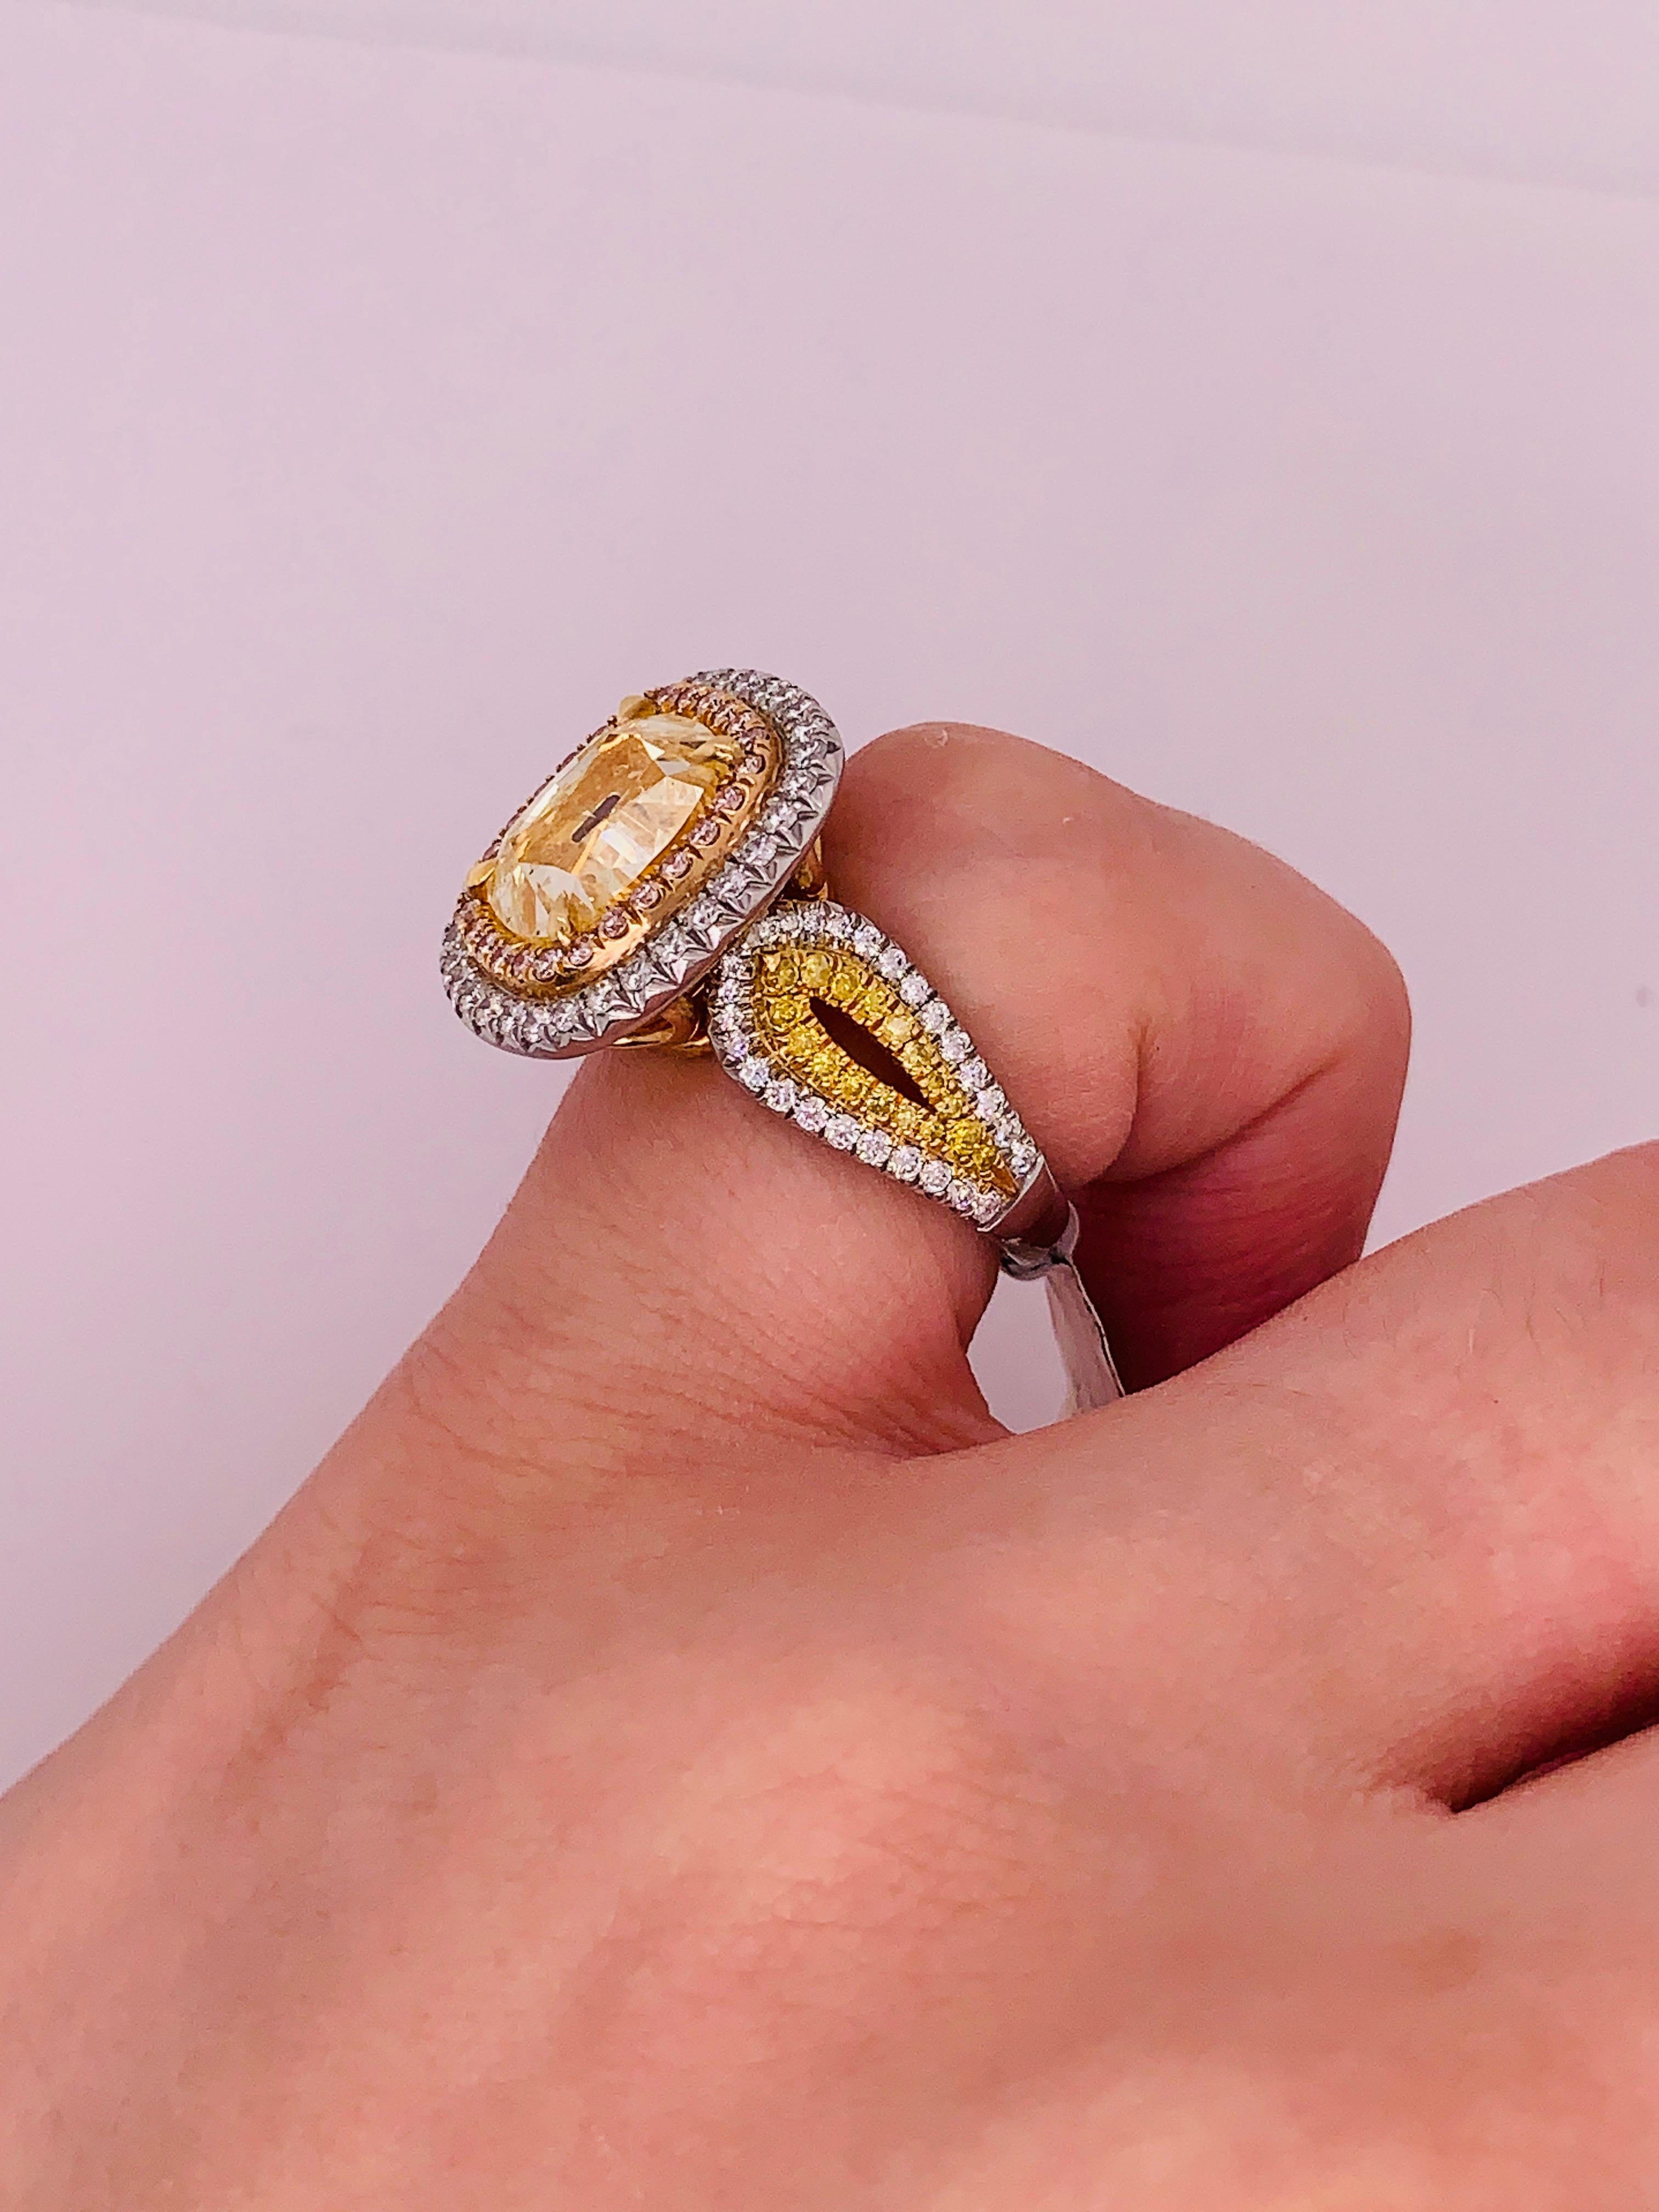 This one of a kind diamond ring, designed by Diana M. Jewels combines three natural colored diamonds, Fancy Pink, Fancy Yellow and White diamonds. 
The center stone is 5.02 Carats Fancy Yellow Cushion Cut Diamond, SI1 in Clarity, accompanied by  EGL